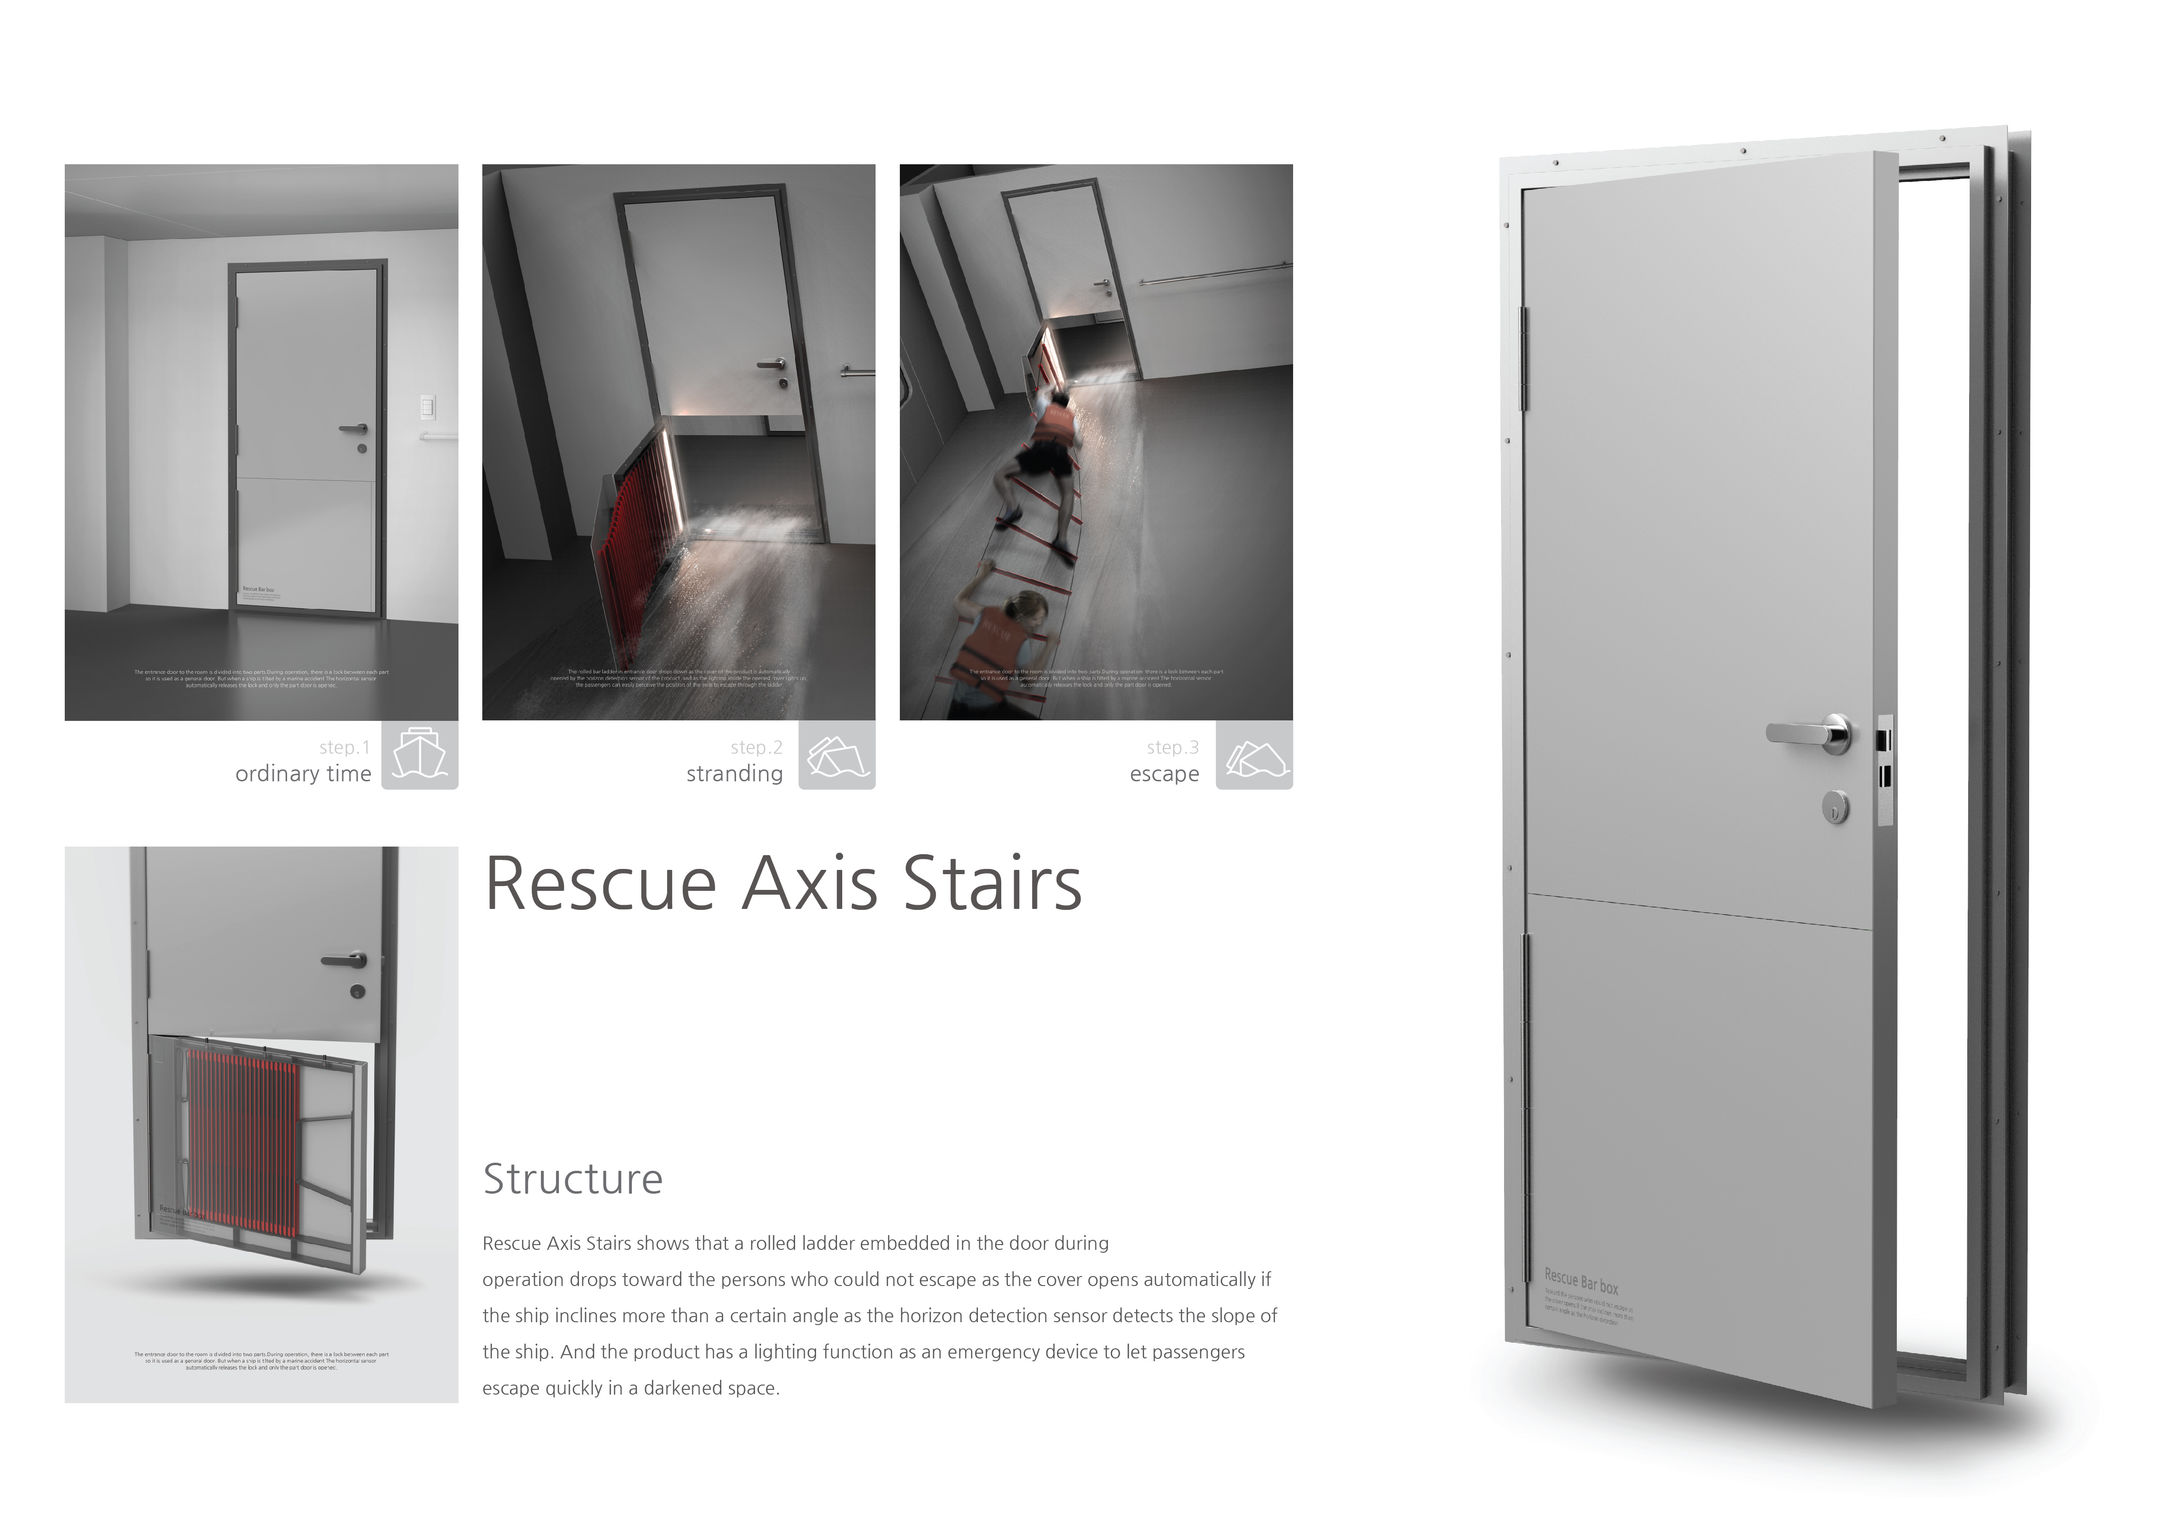 Rescue Axis Stairs